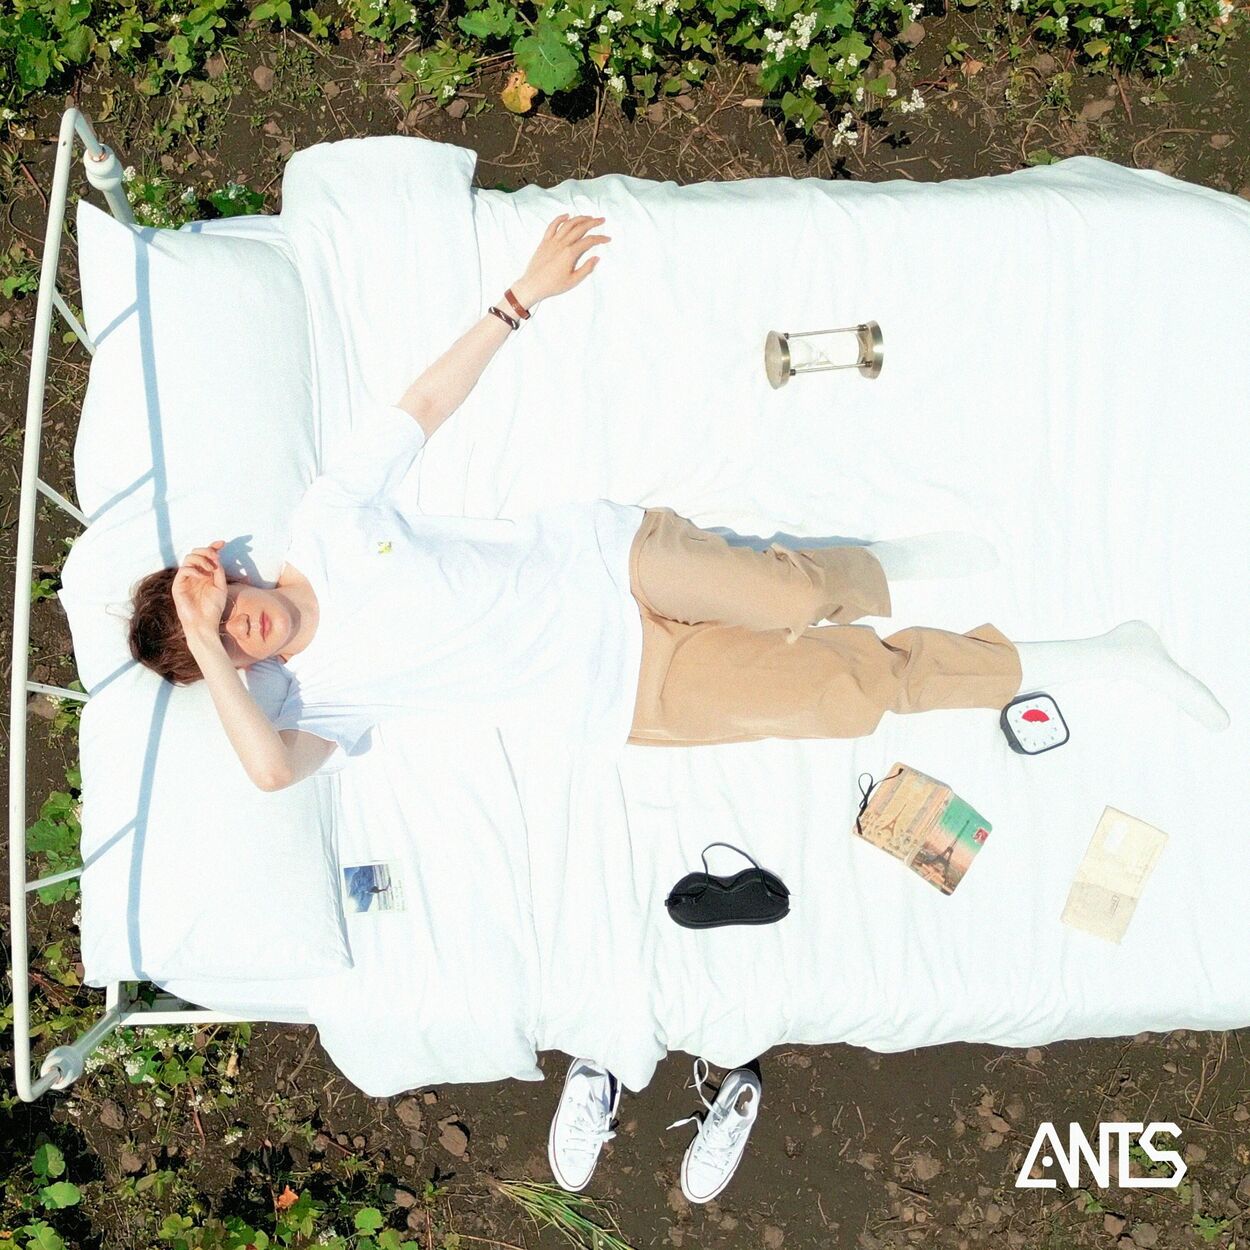 Ants – Driving with you – Single